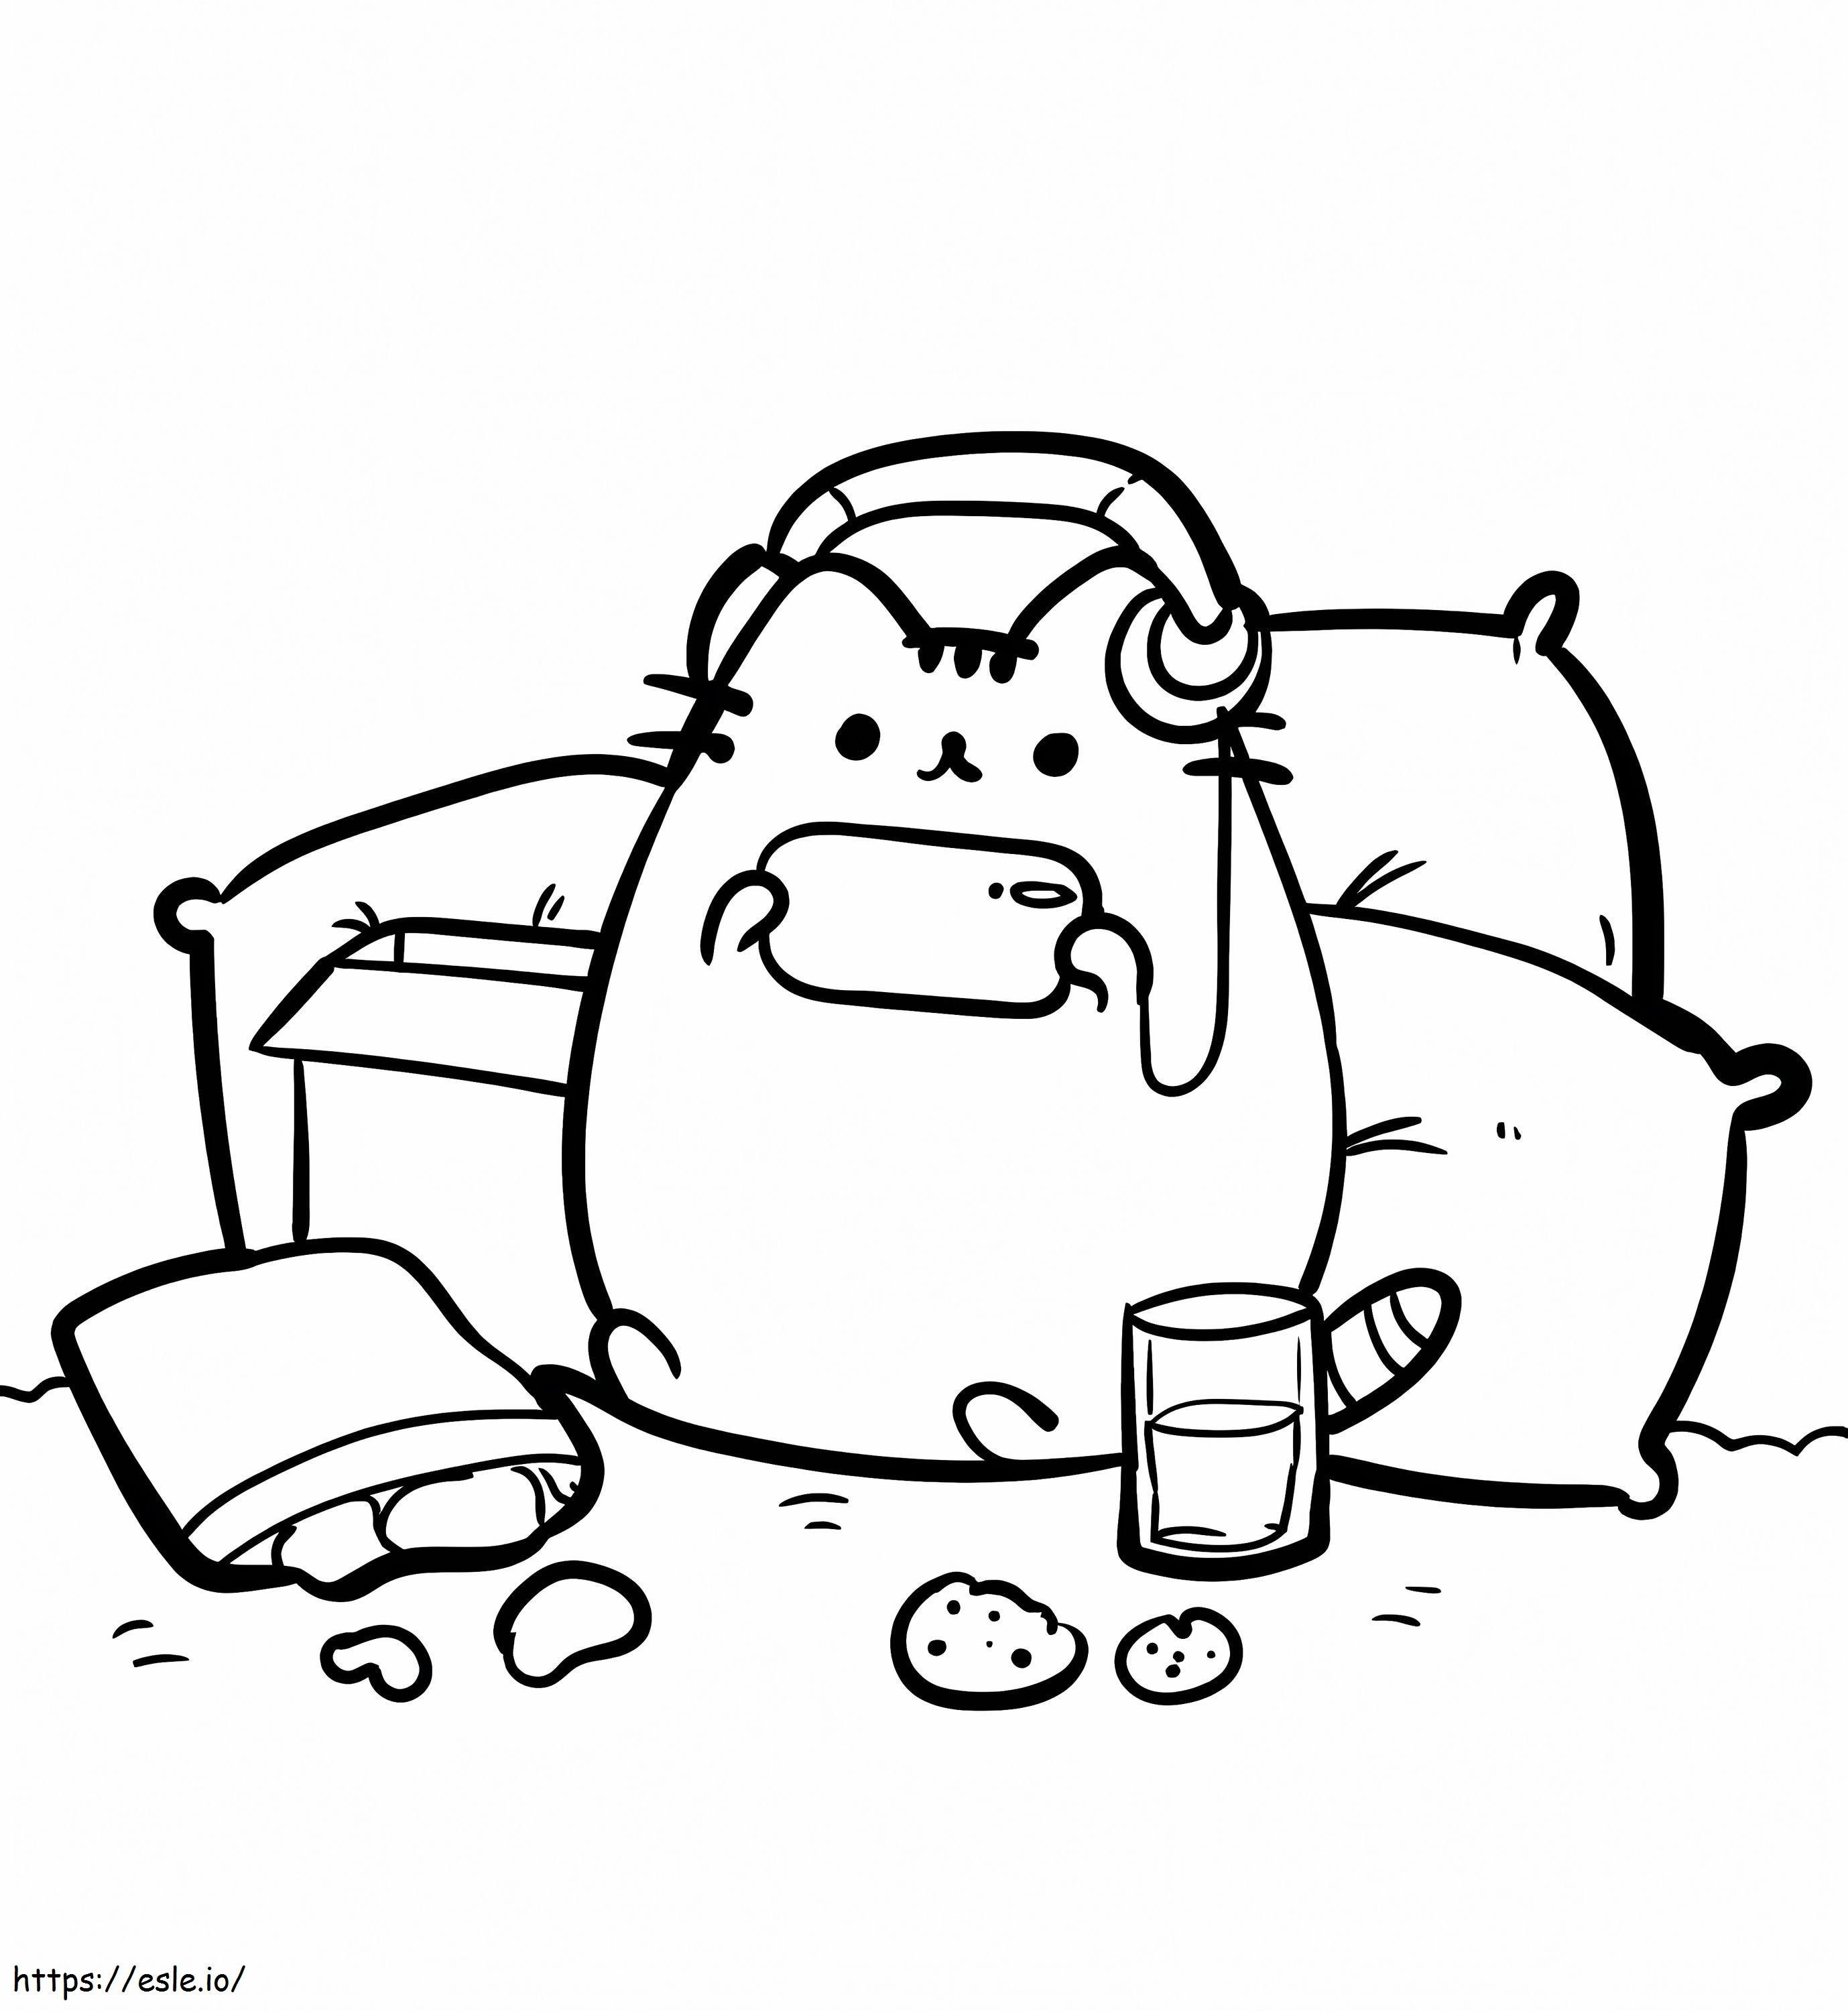 Pusheen Playing The Game coloring page